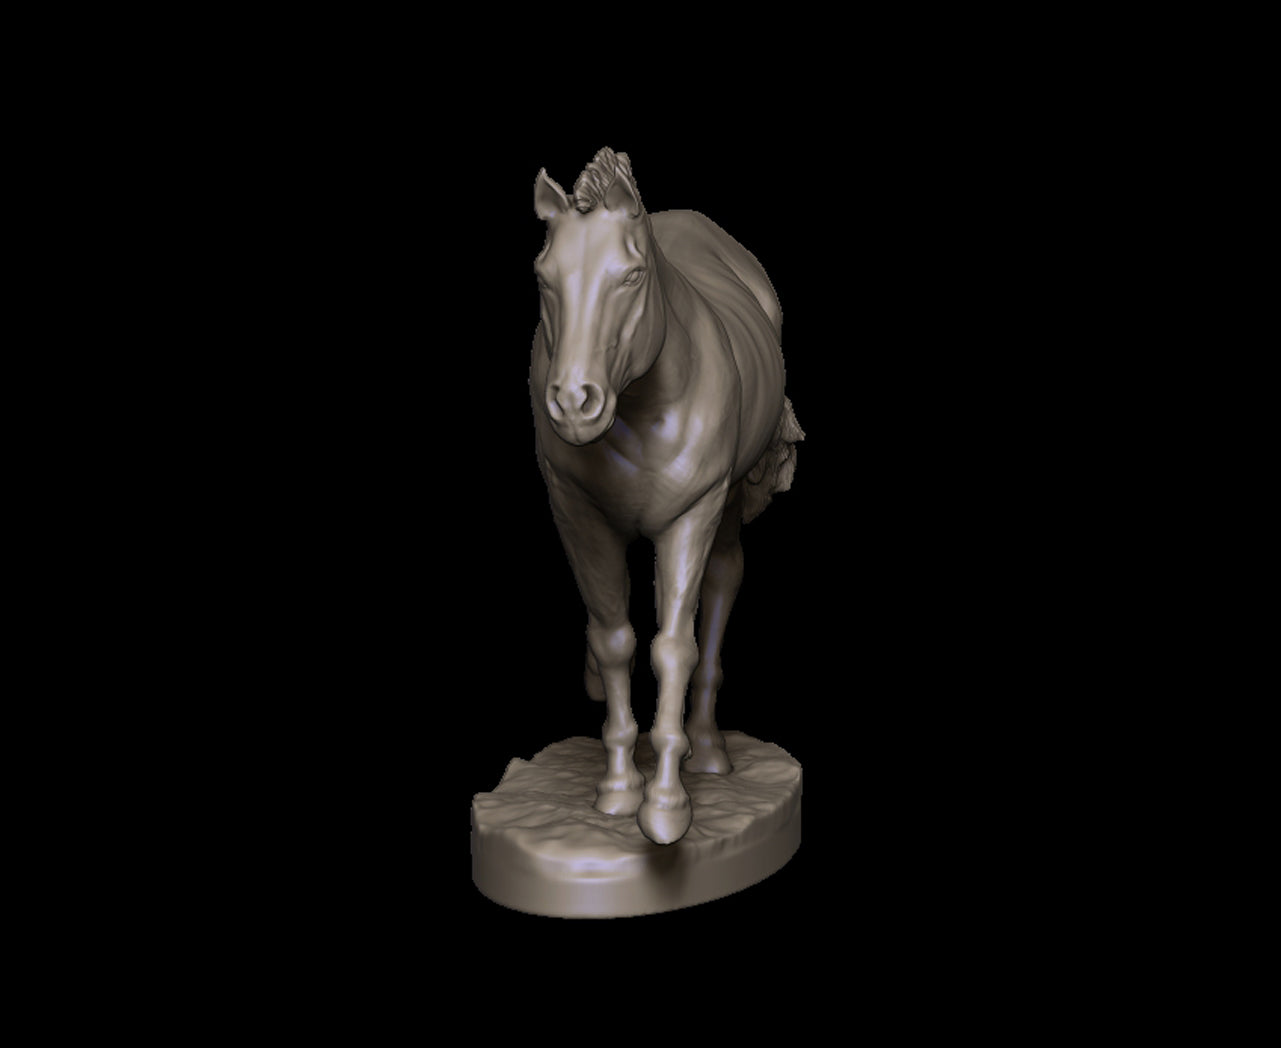 Prehistoric type pony 1/6 scale - White resin ready to prep / paint  LTD EDITION - Pre - Order